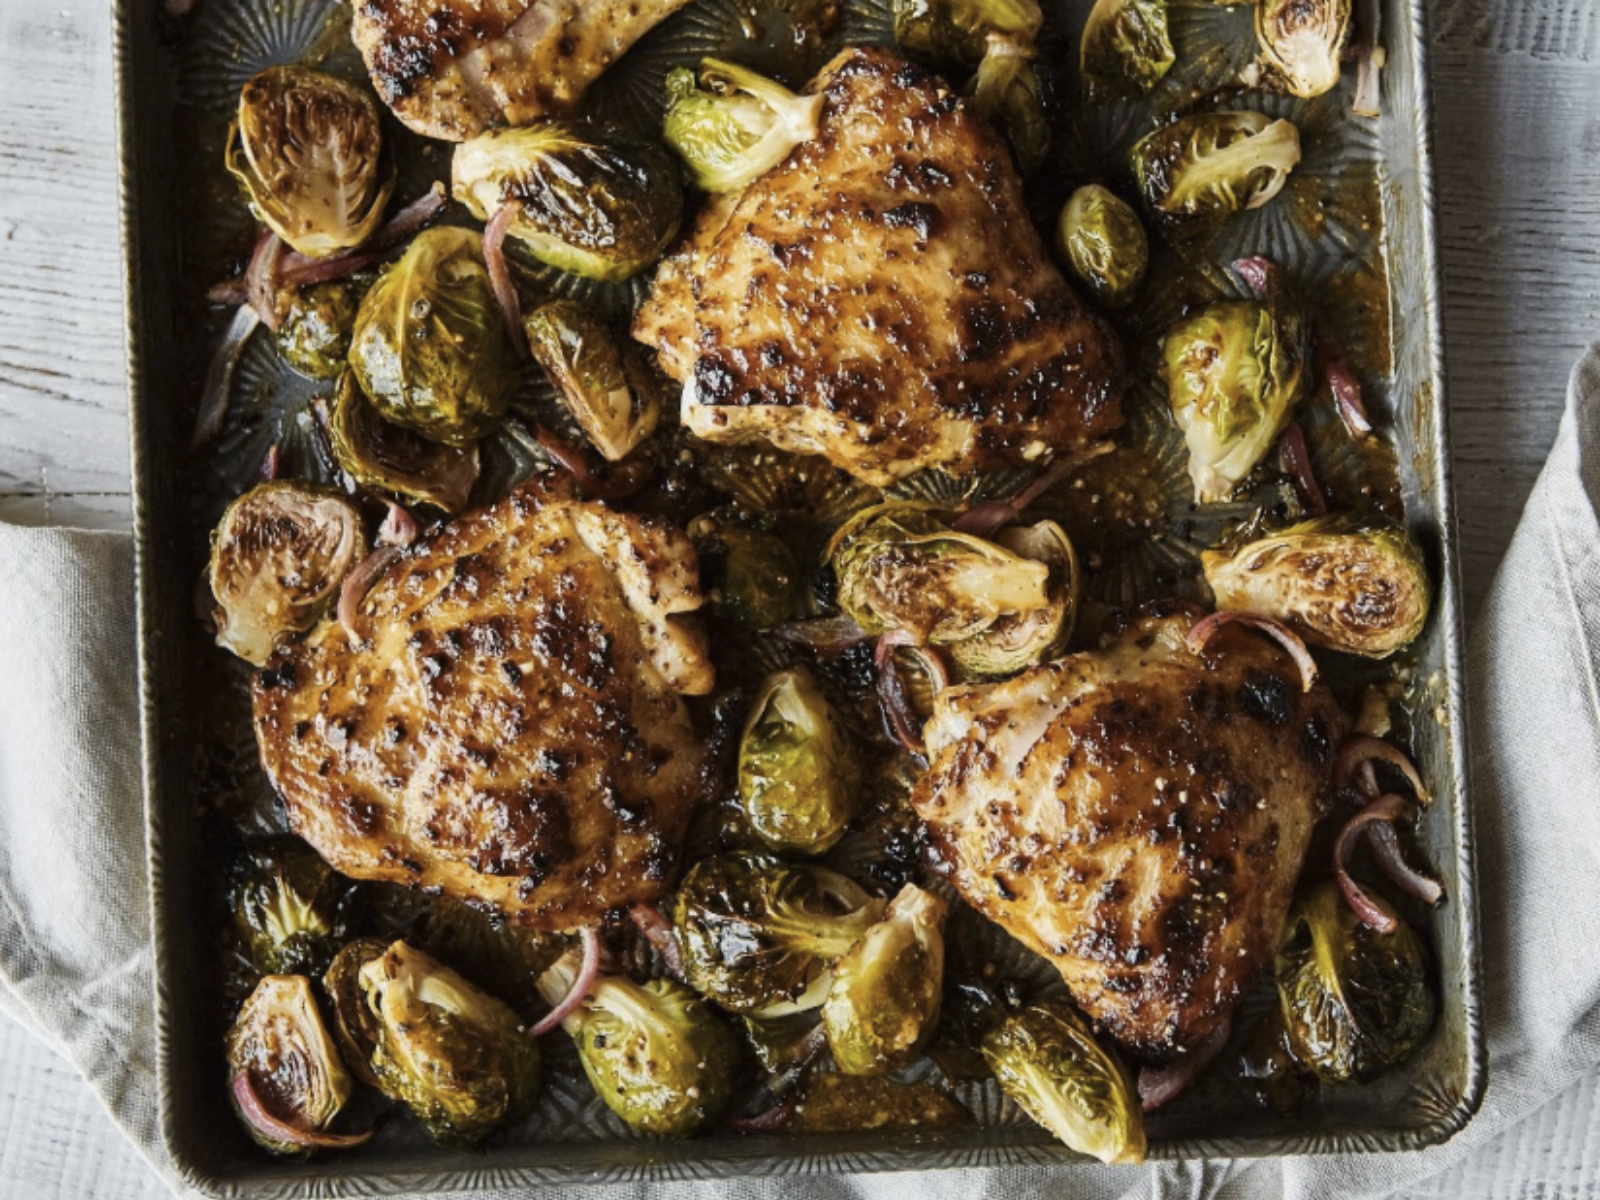 Honey Mustard Sheet Pan Chicken with Brussels Sprouts